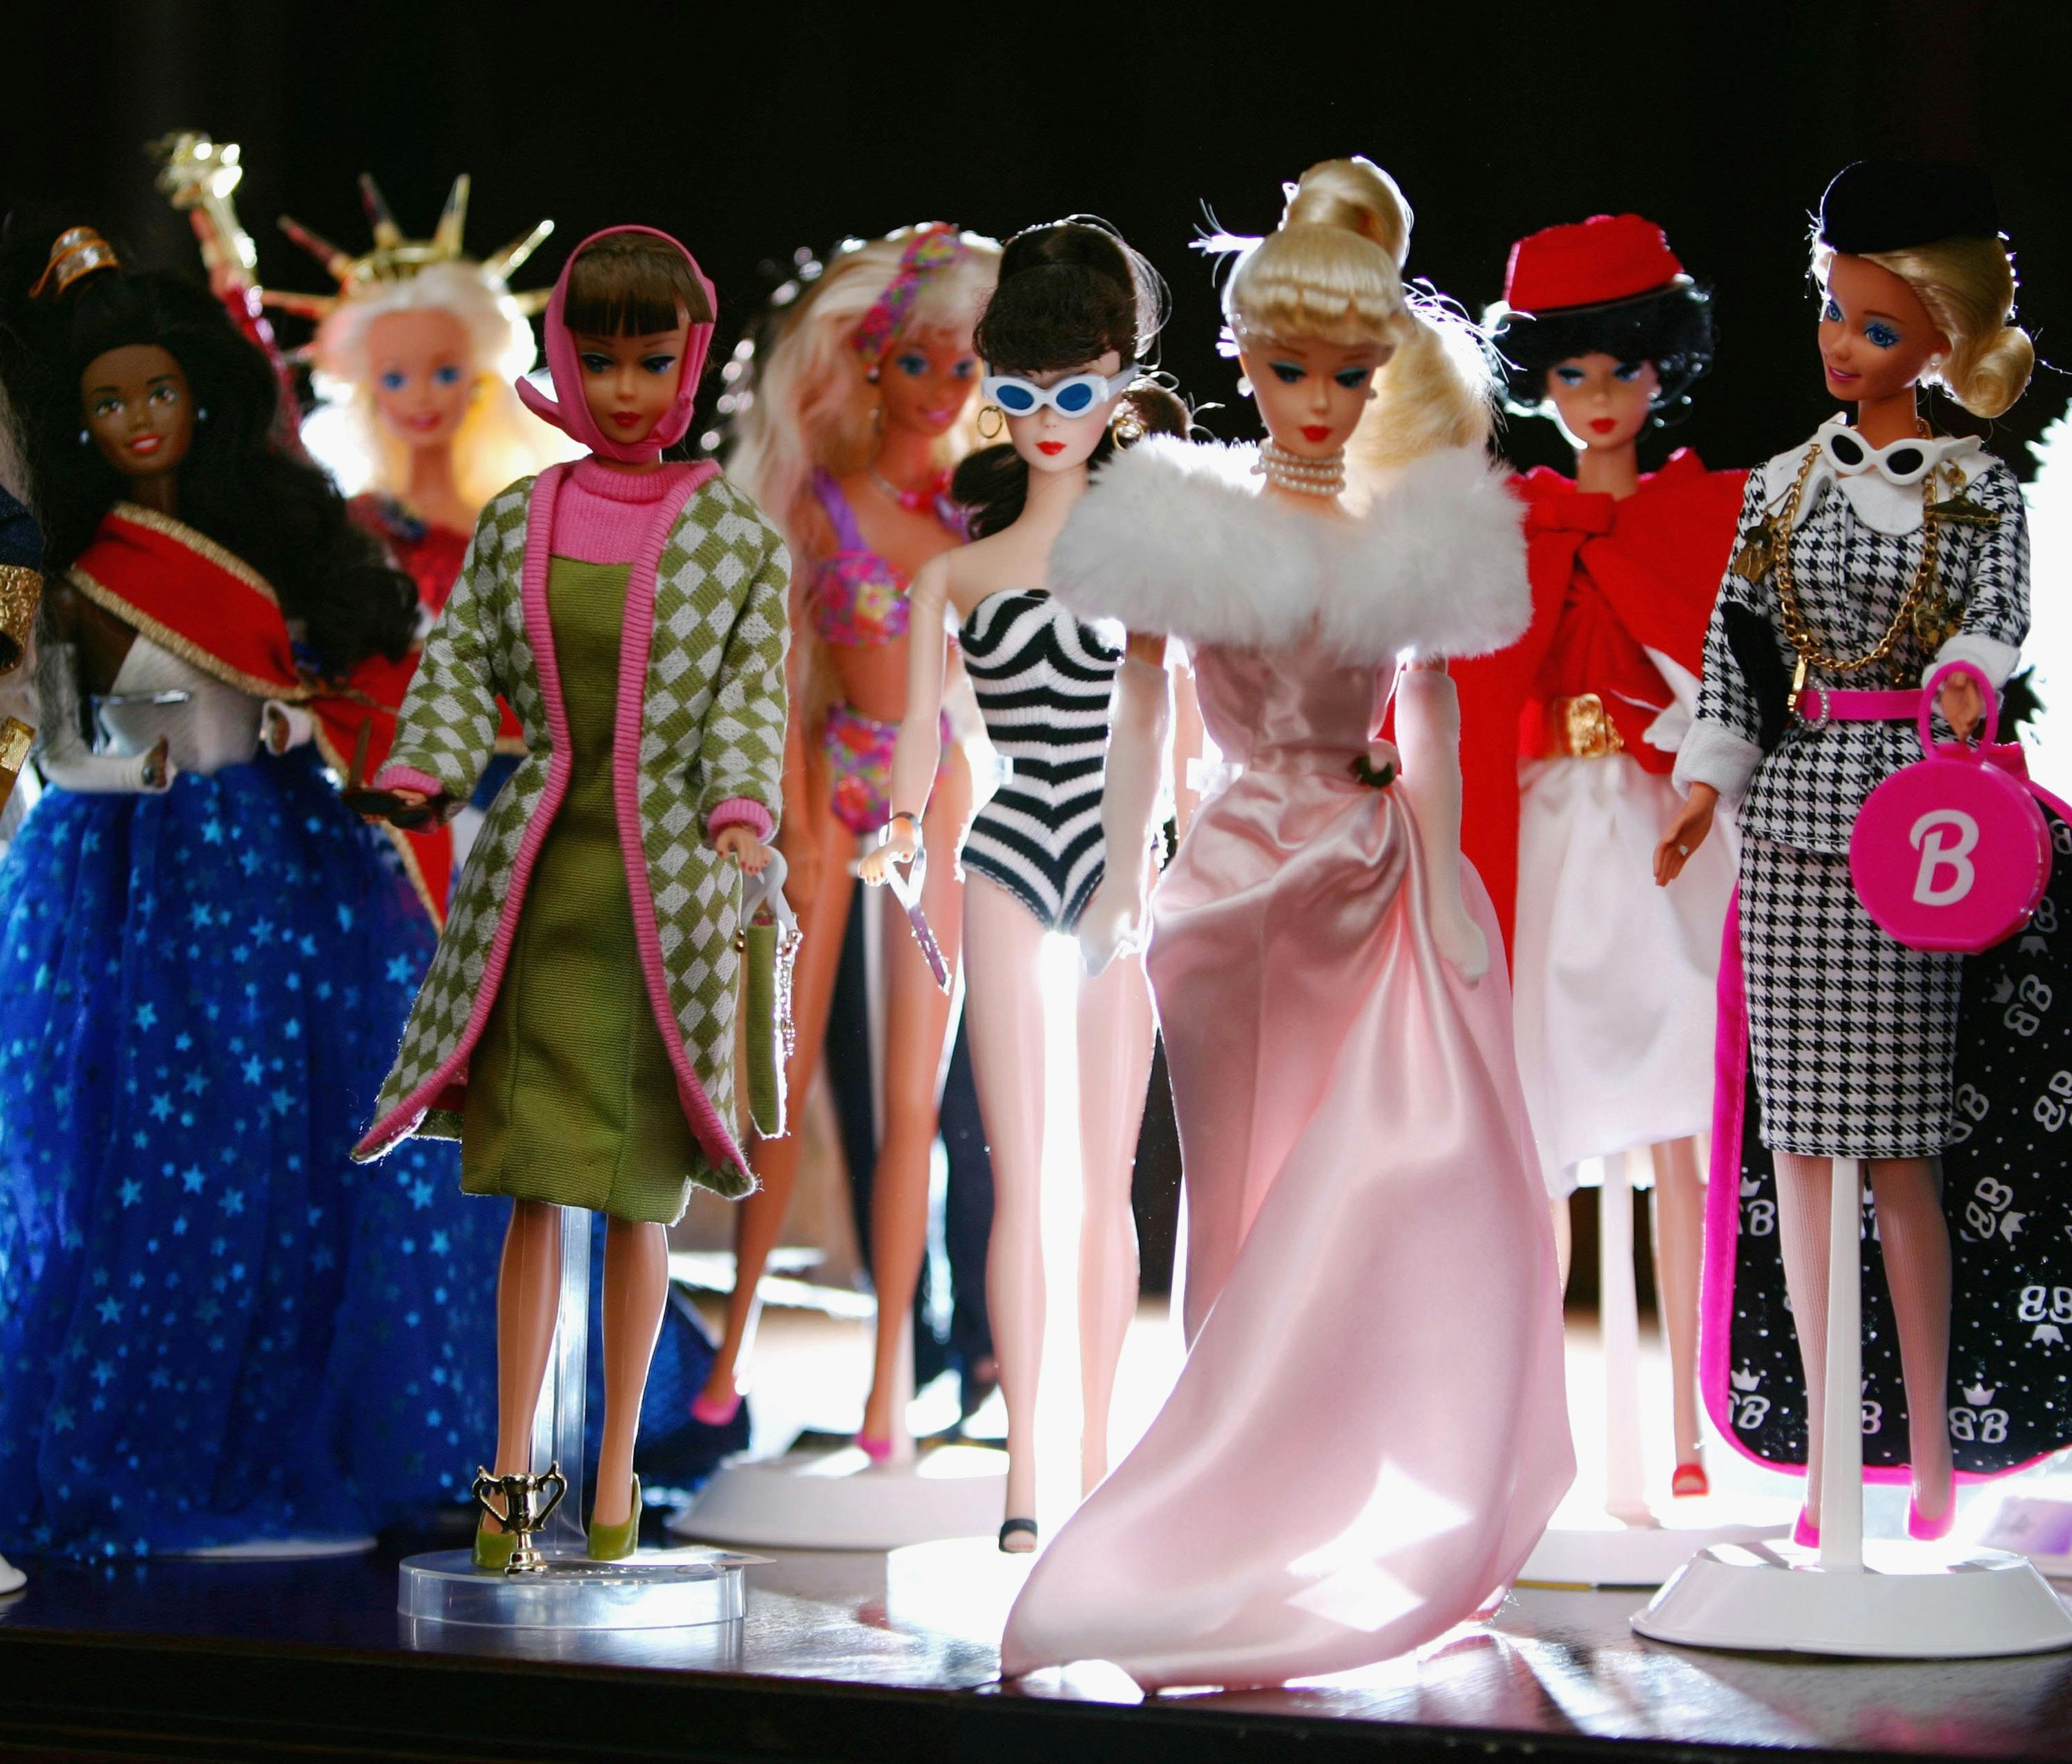 The History of Barbie: The World's Most Popular Doll